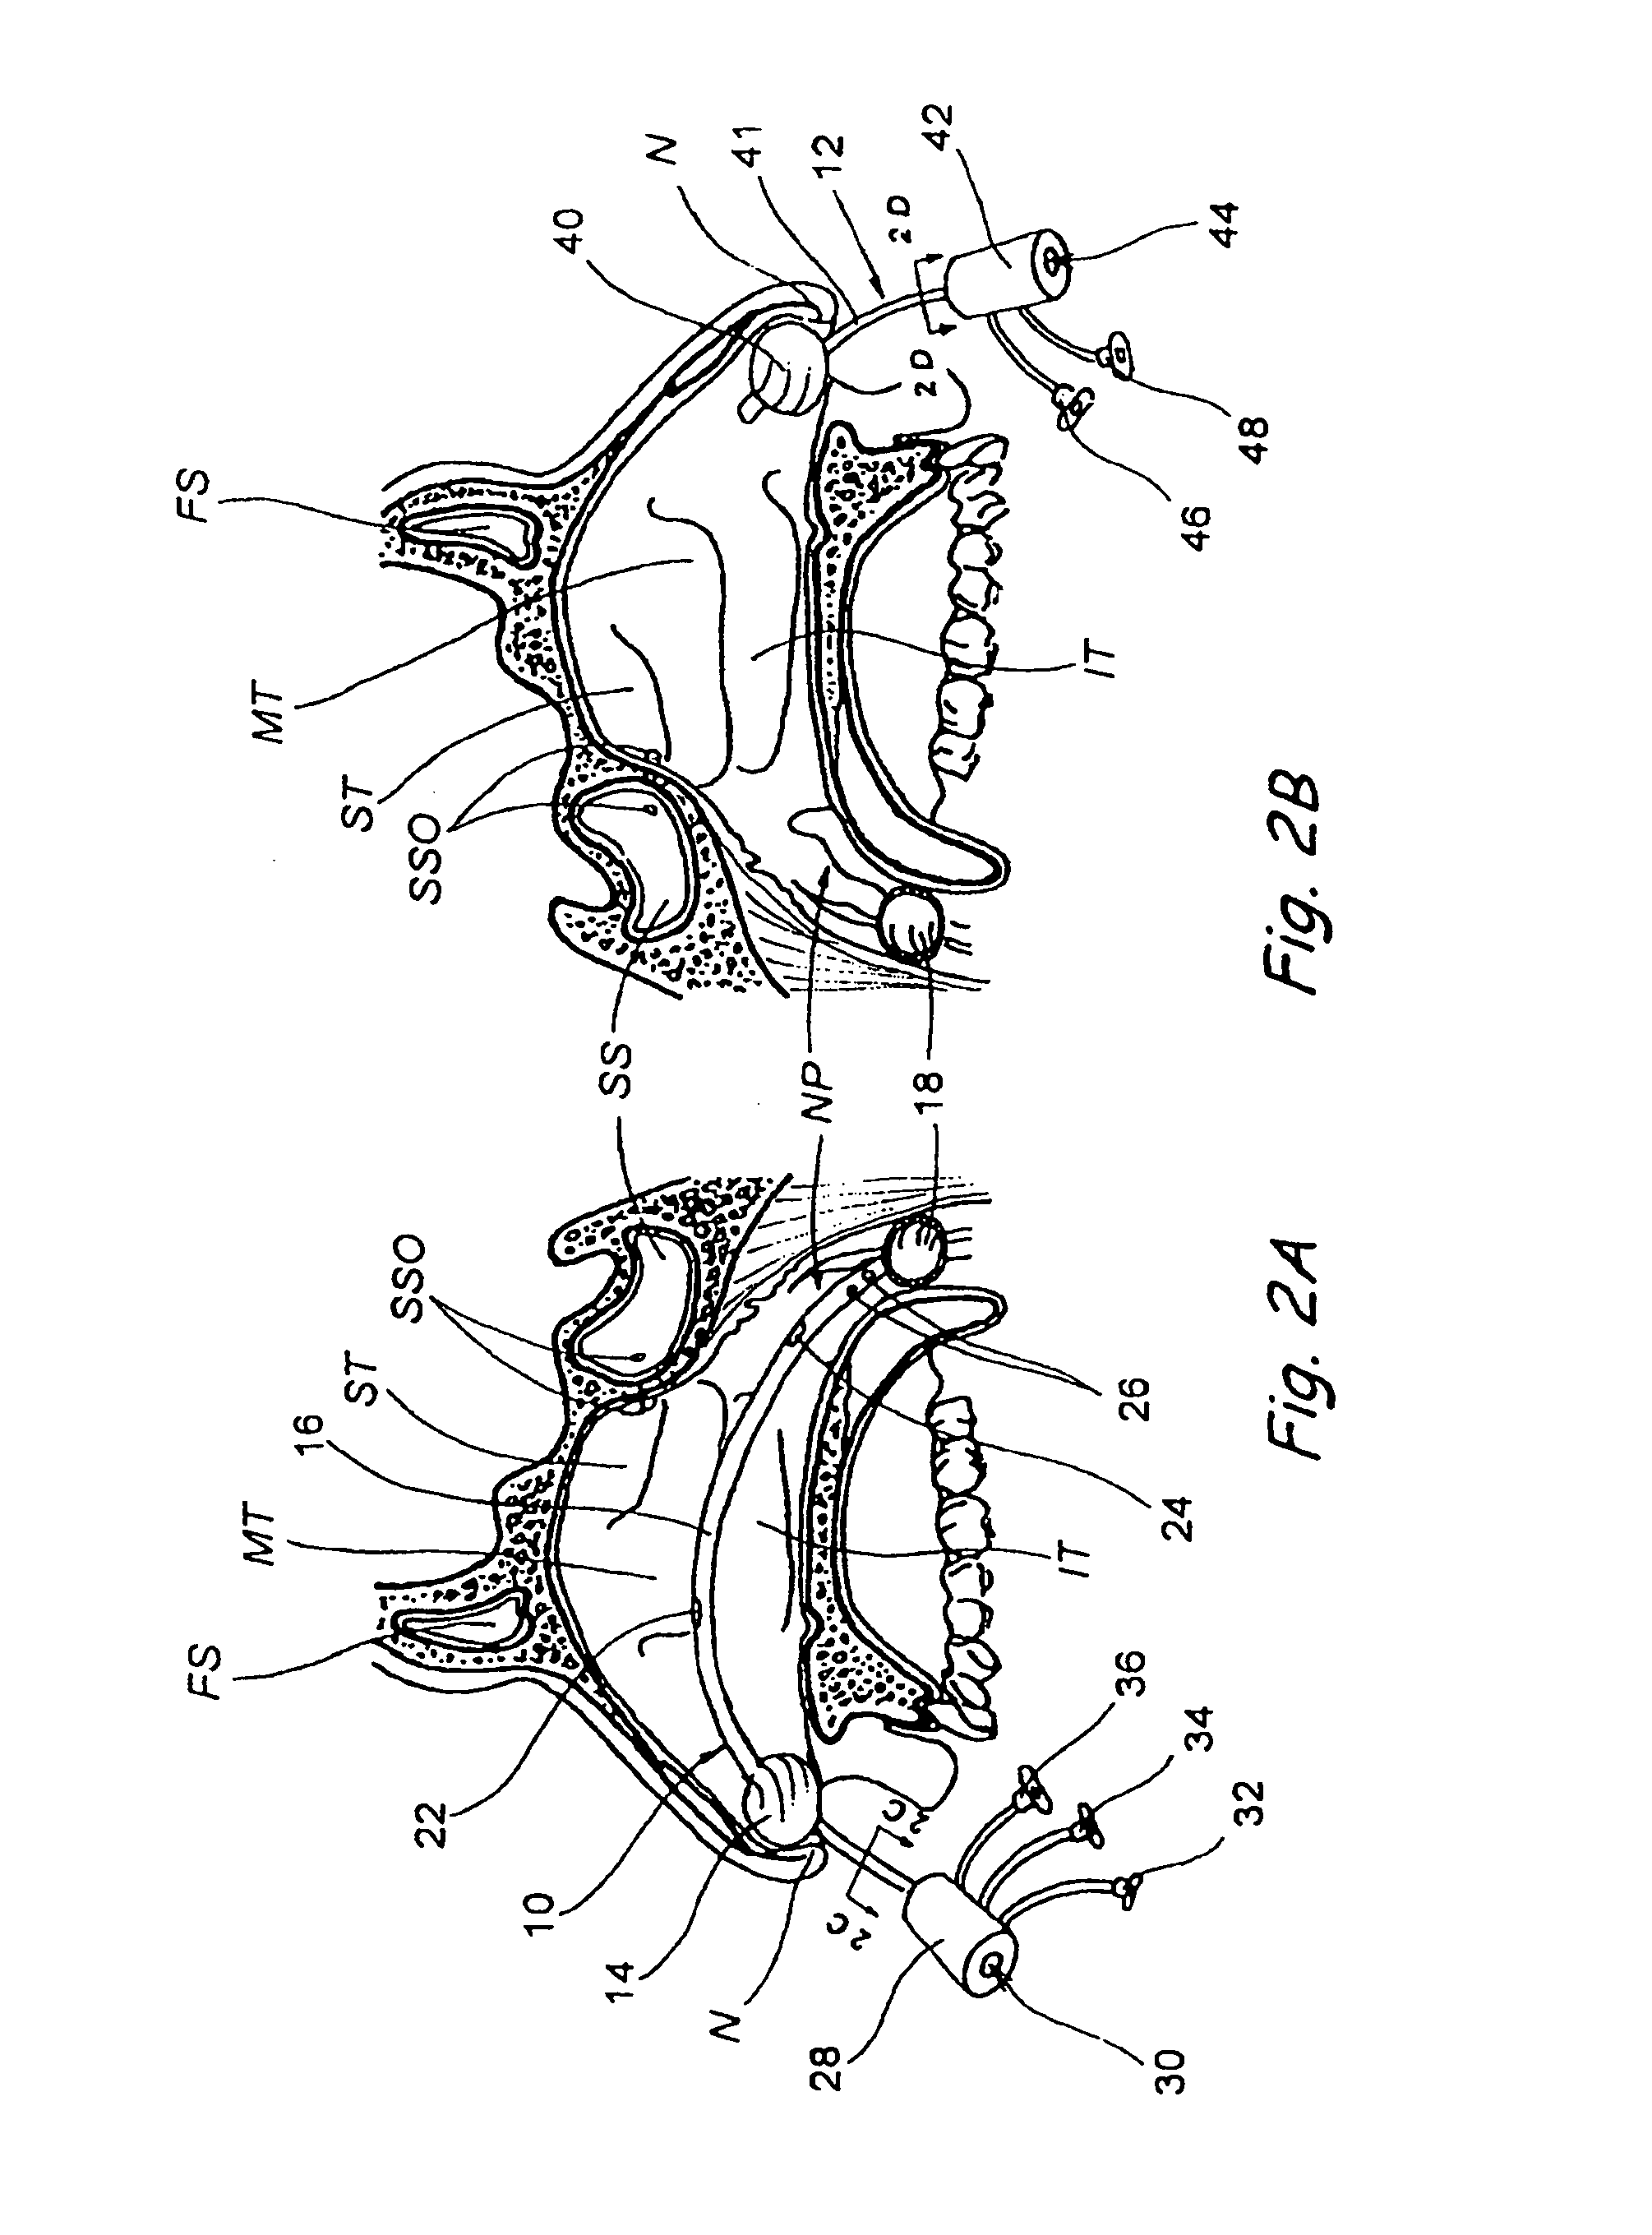 Devices, systems and methods for diagnosing and treating sinusitis and other disorders of the ears, Nose and/or throat